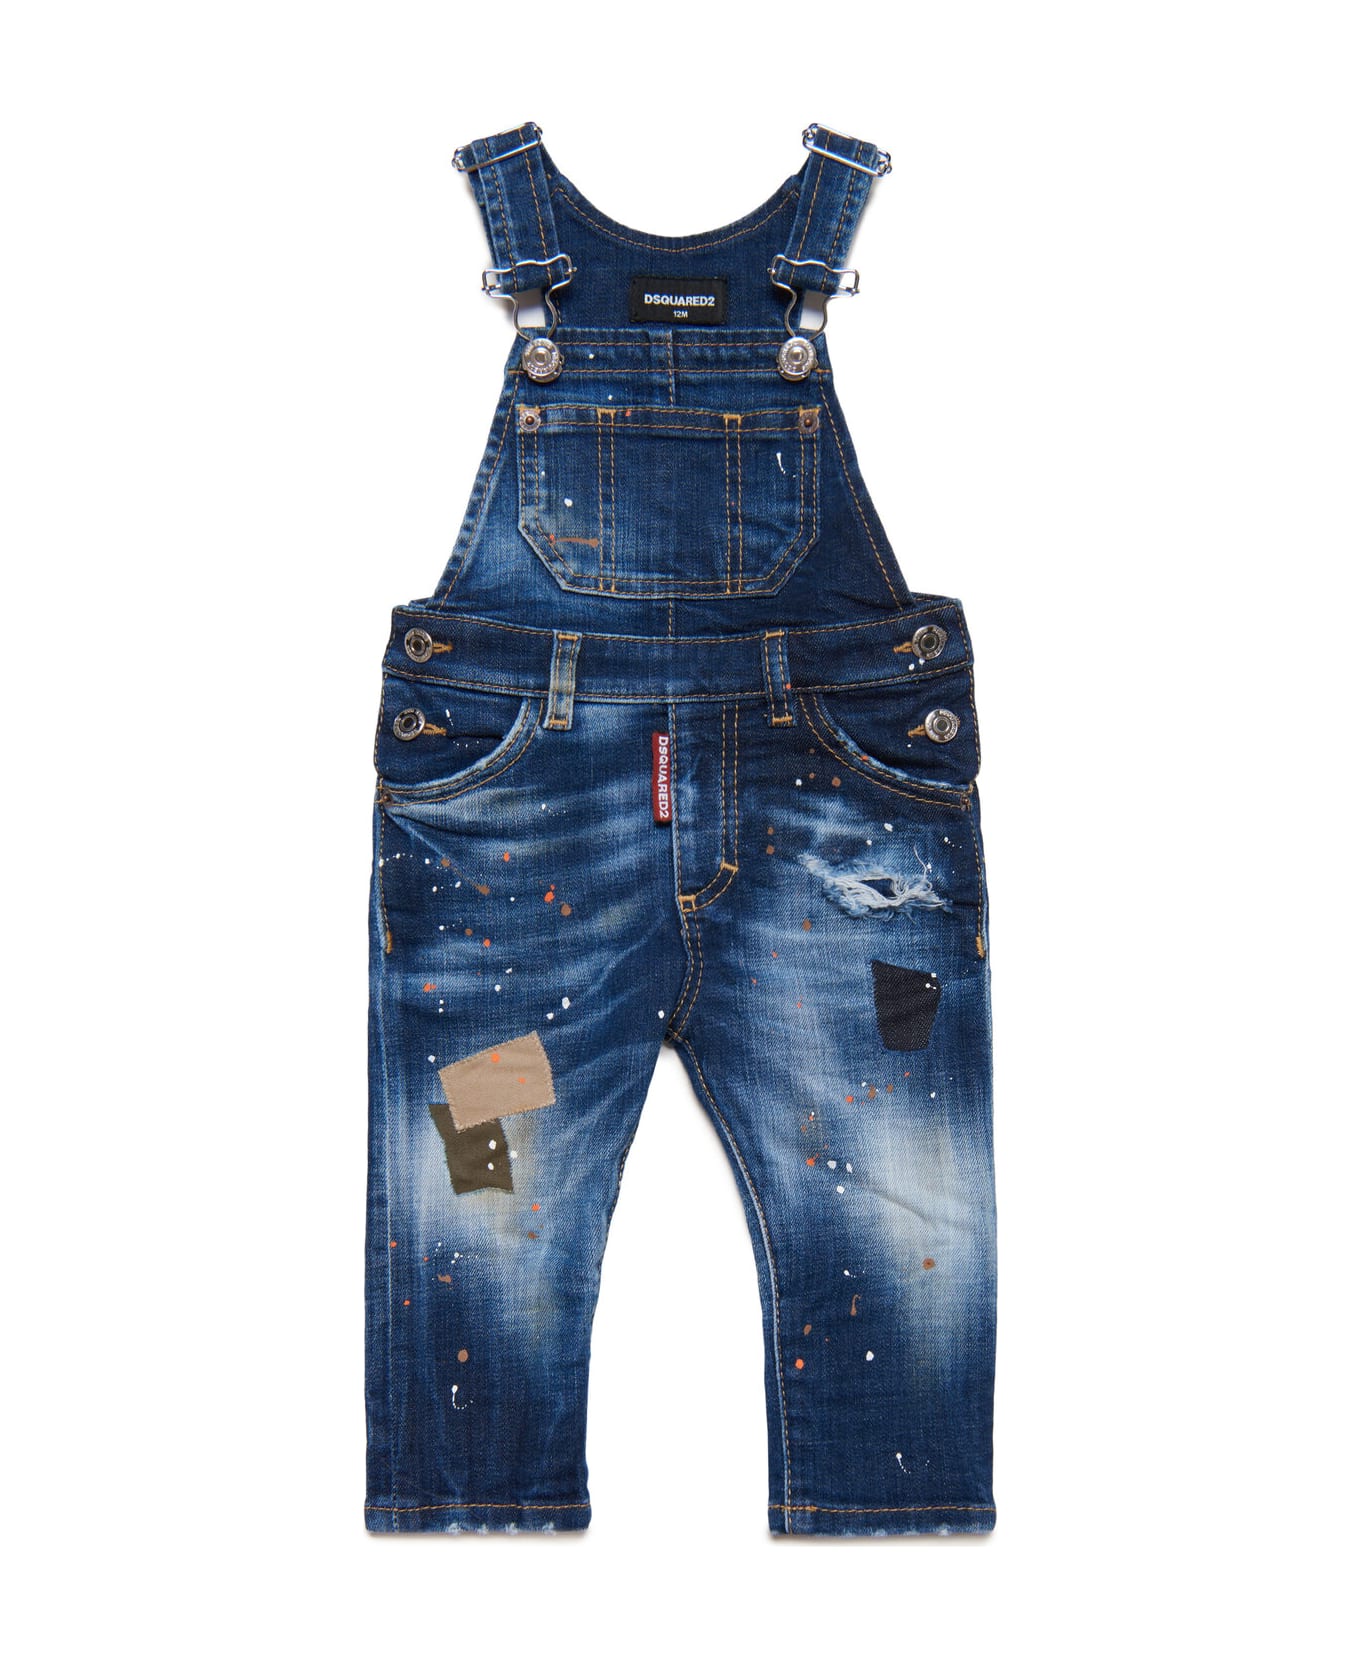 Dsquared2 D2j217b Overalls Dsquared Shaded Dark Blue Denim Dungarees With Patches And Spots - Blue Denim